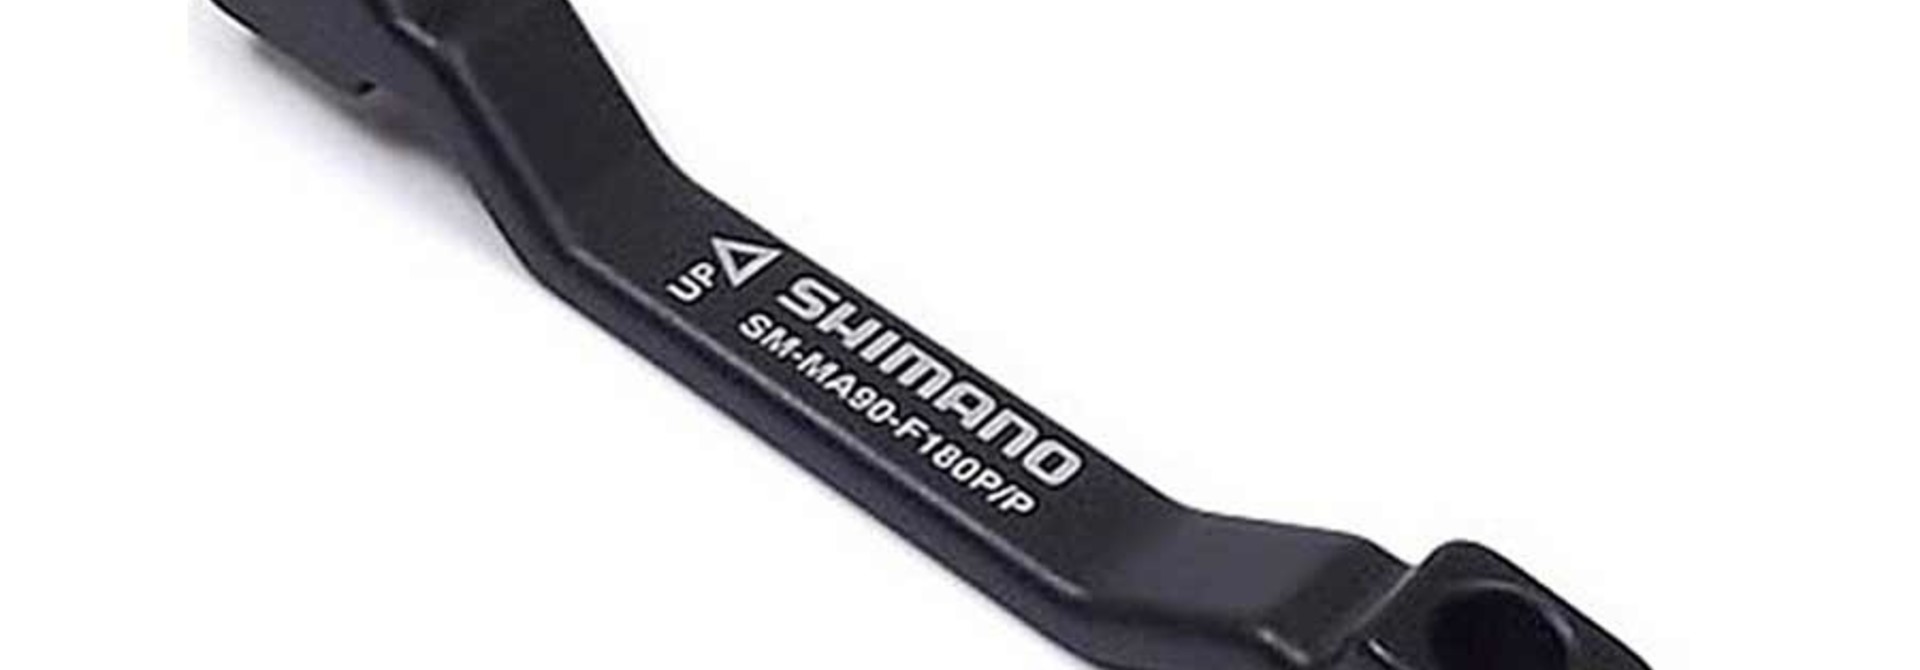 Shimano, XTR SM-MA90-F180P/P Disc brake adapter for Post Mount caliper, Post Mount fork, 180mm rotor